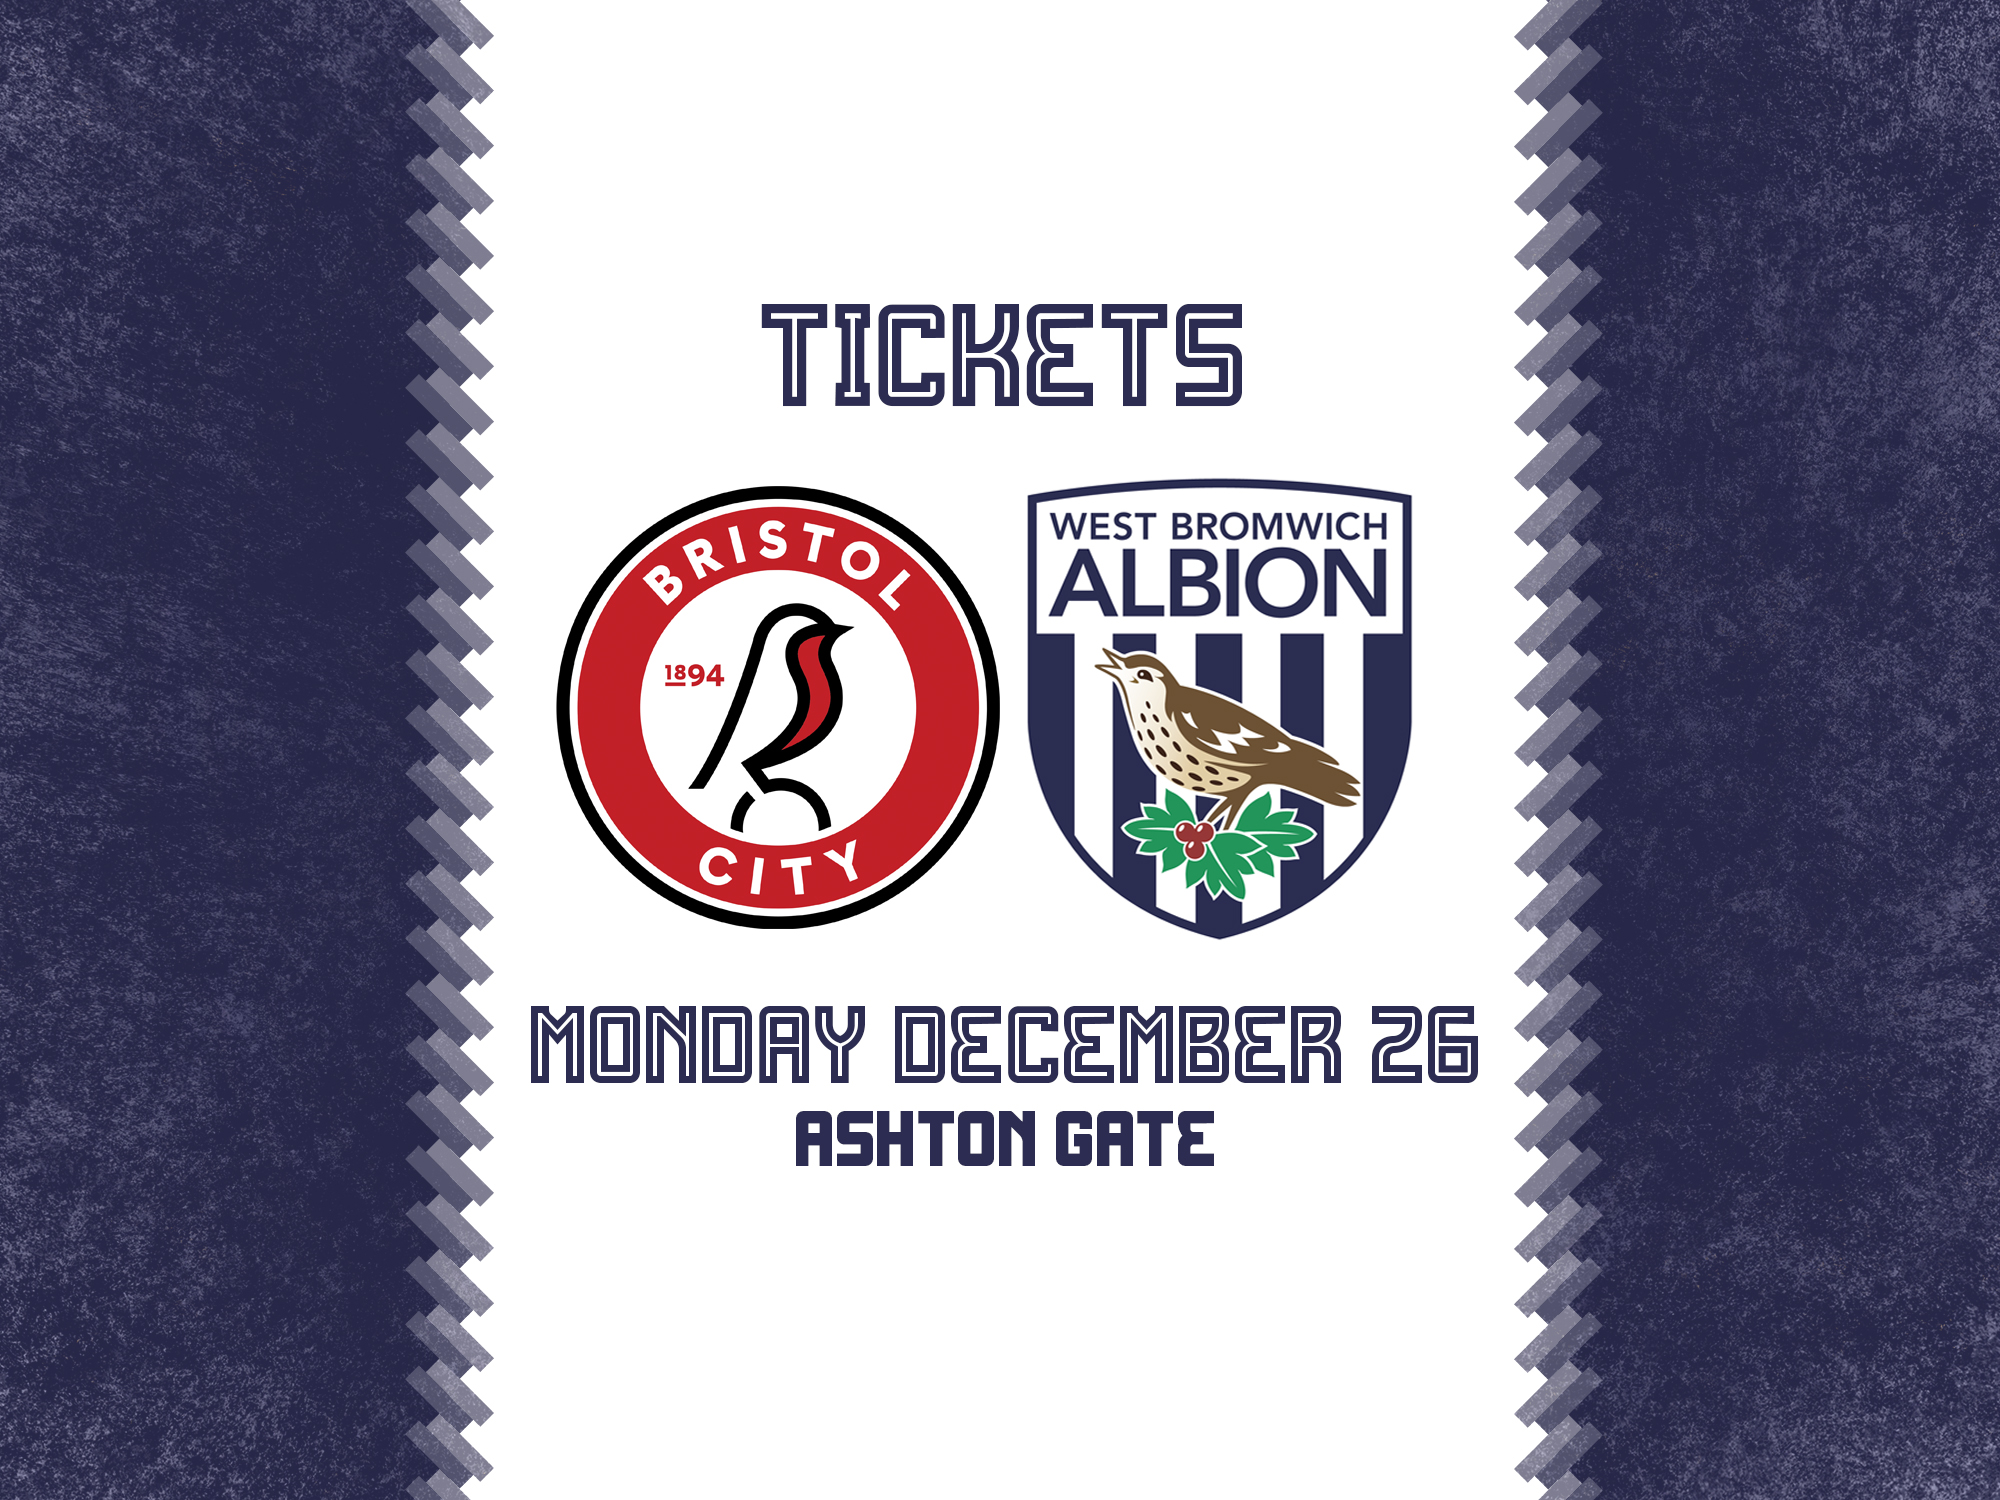 A ticket graphic displaying Albion's badge alongside Bristol City's, also detailing the date of the match as Tuesday, October 18